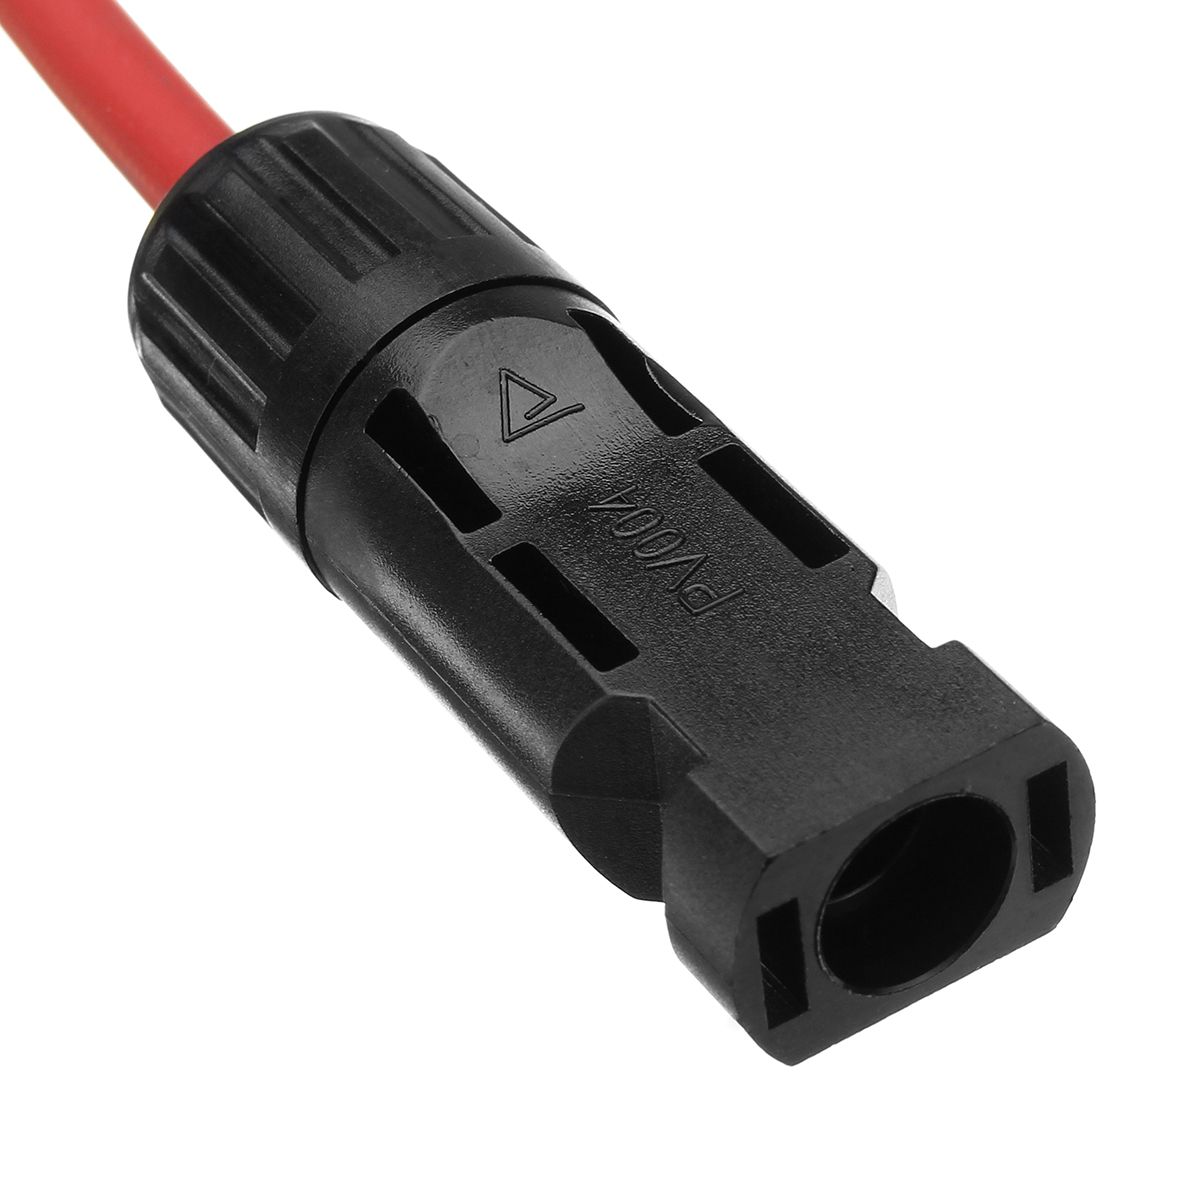 12-AWG-1-Meter-Solar-Panel-Extension-Cable-Wire-BlackRed-with-MC4-Connectors-1338748